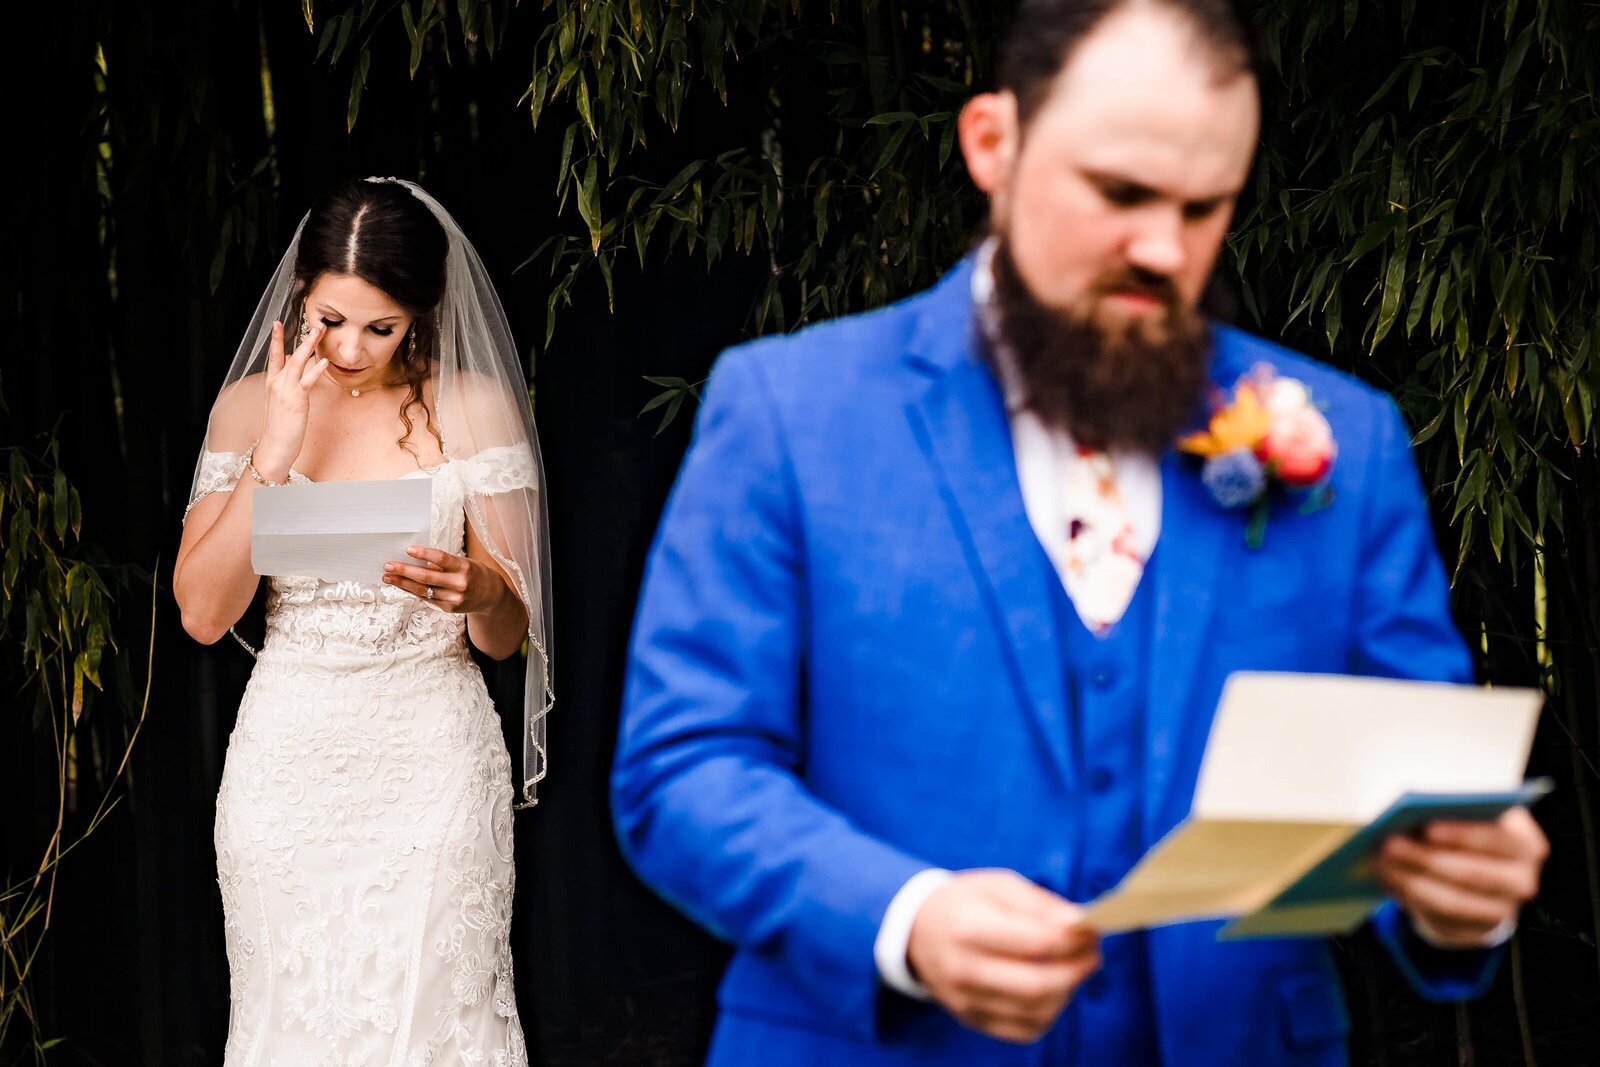 bride wipes away a tear as she reads a letter from the groom; in the foreground the groom is reading a letter from the bride